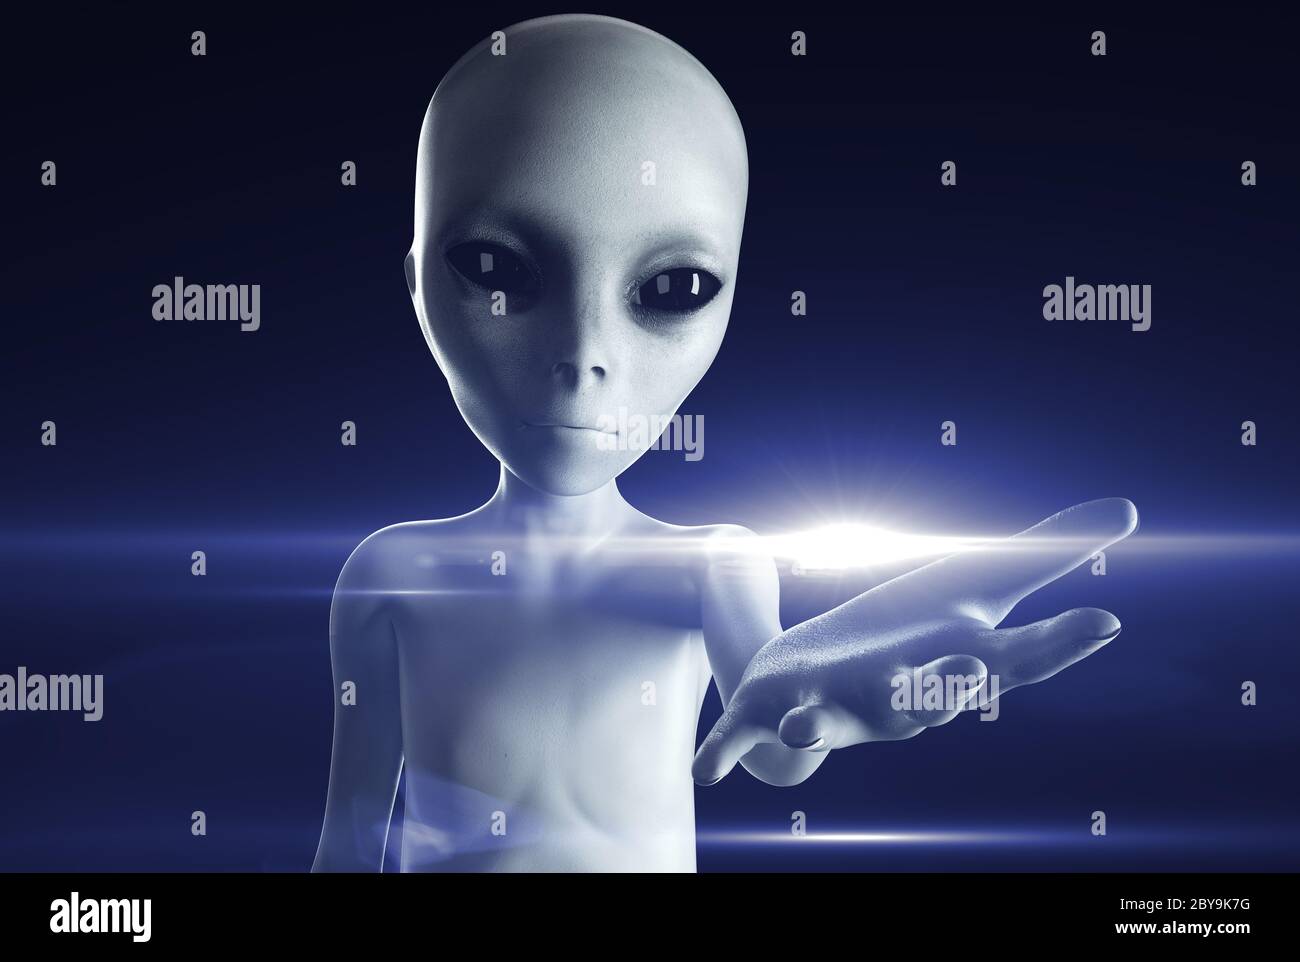 Alien hand reaching out. UFO futuristic concept. 3d rendering. Stock Photo